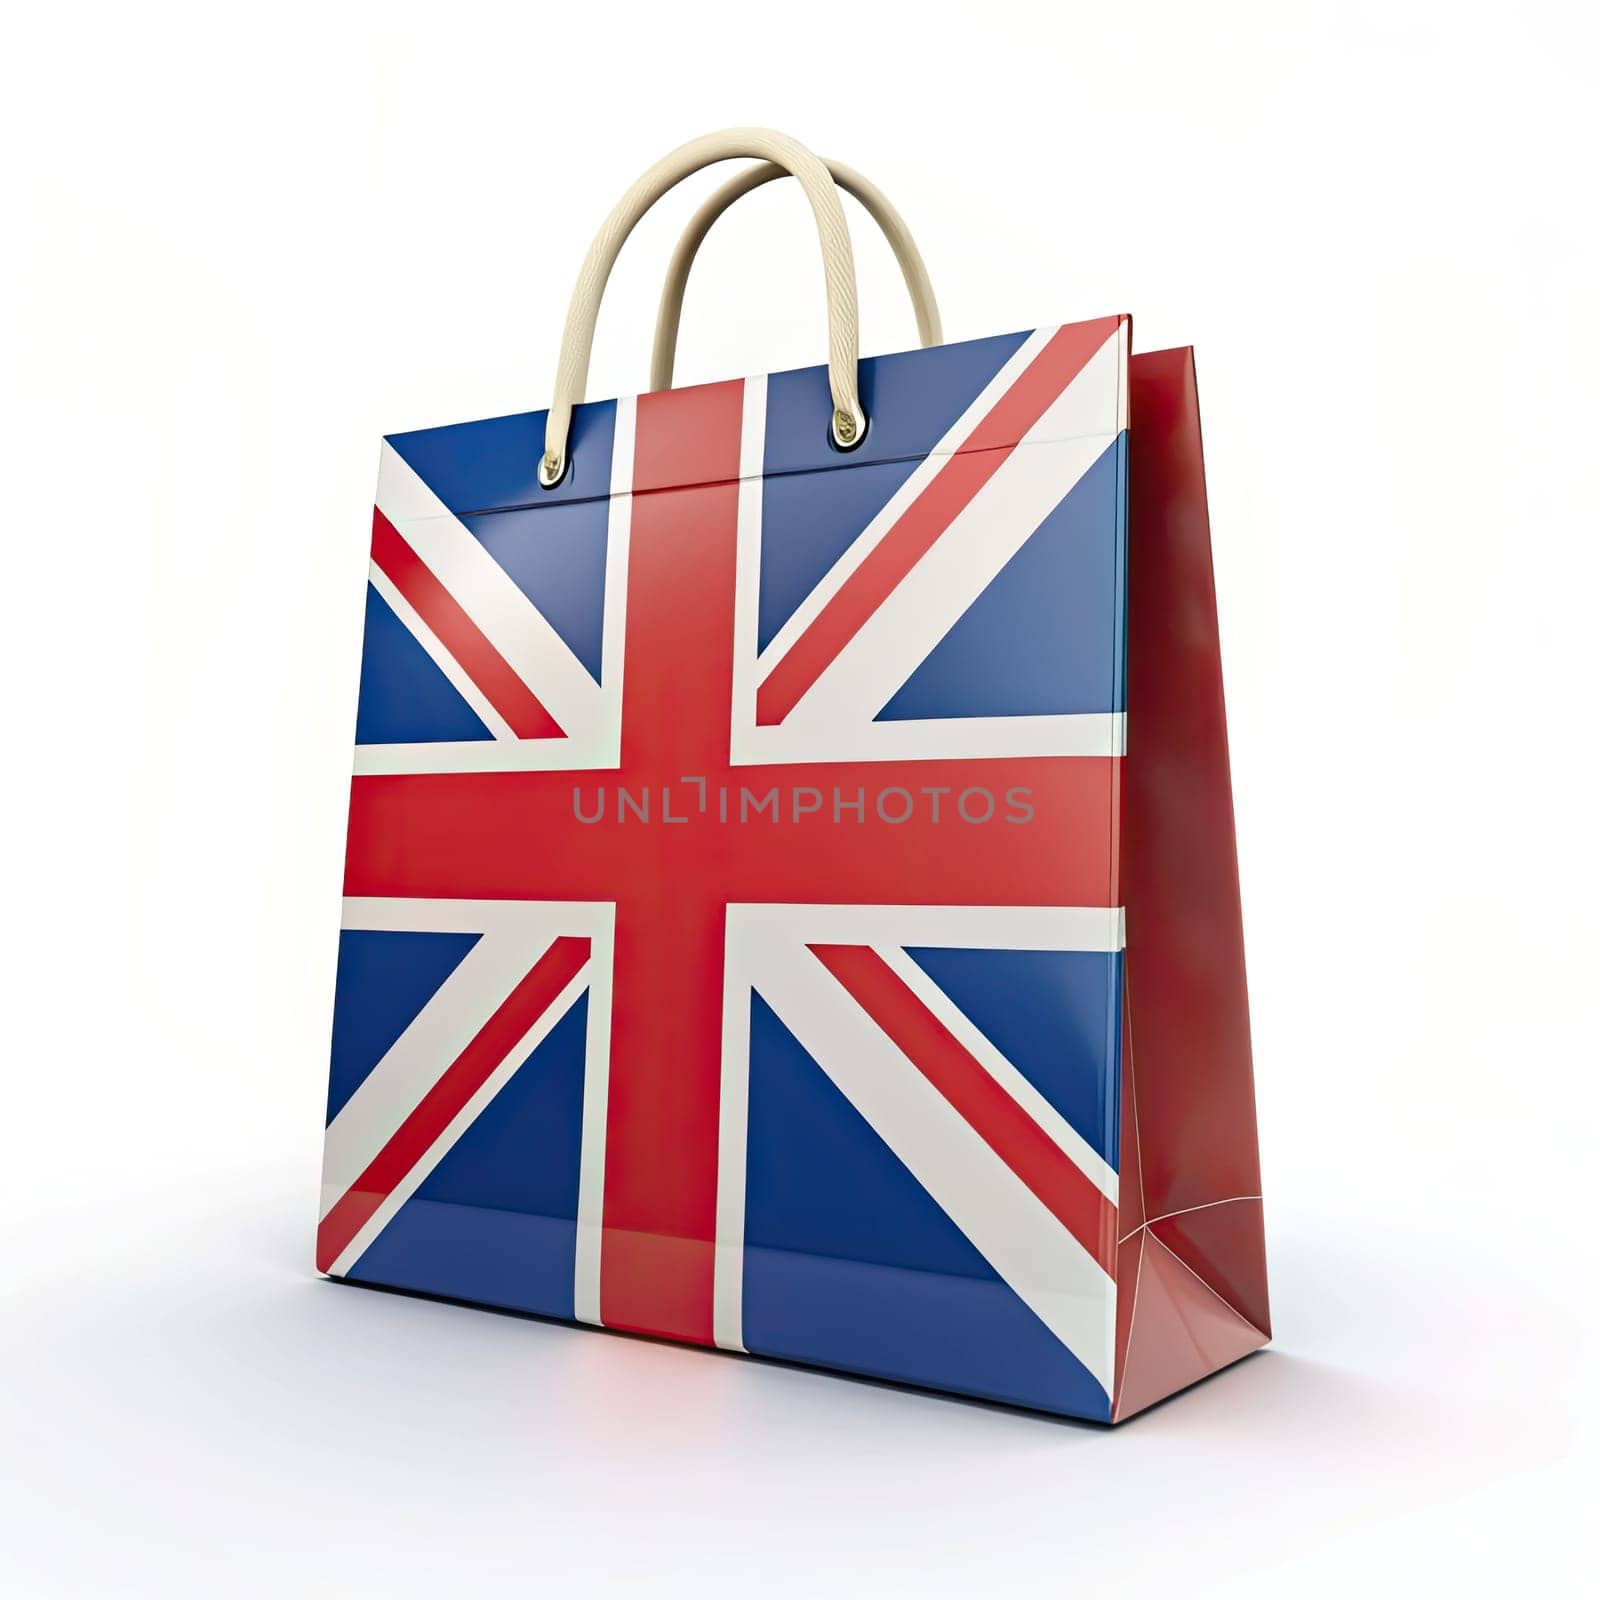 Elevate your style with our United Kingdom flag shopping bag on a pristine white background. Embrace the essence of British pride as you flaunt the iconic Union Jack design wherever you go. Crafted with durability and style in mind, this bag is perfect for everyday use or as a fashionable accessory. Show off your patriotism and stand out from the crowd with this must-have fashion item. Whether you're running errands or enjoying a day out, let this bag be a symbol of your love for the UK. UK Flag Shopping Bag: Pride on White - Experience the essence of British pride with our UK flag shopping bag. Embrace the national symbol and show off your patriotism with this fashion accessory. The iconic Union Jack design stands out against a crisp white background, embodying the rich heritage and culture of the UK. Perfect for retail therapy, indulge in consumerism while celebrating your British identity. Elevate your lifestyle with this minimalistic yet impactful design, making it a must-have fashion item and a proud British pride accessory. Bring home a piece of British heritage with our stylish souvenir.